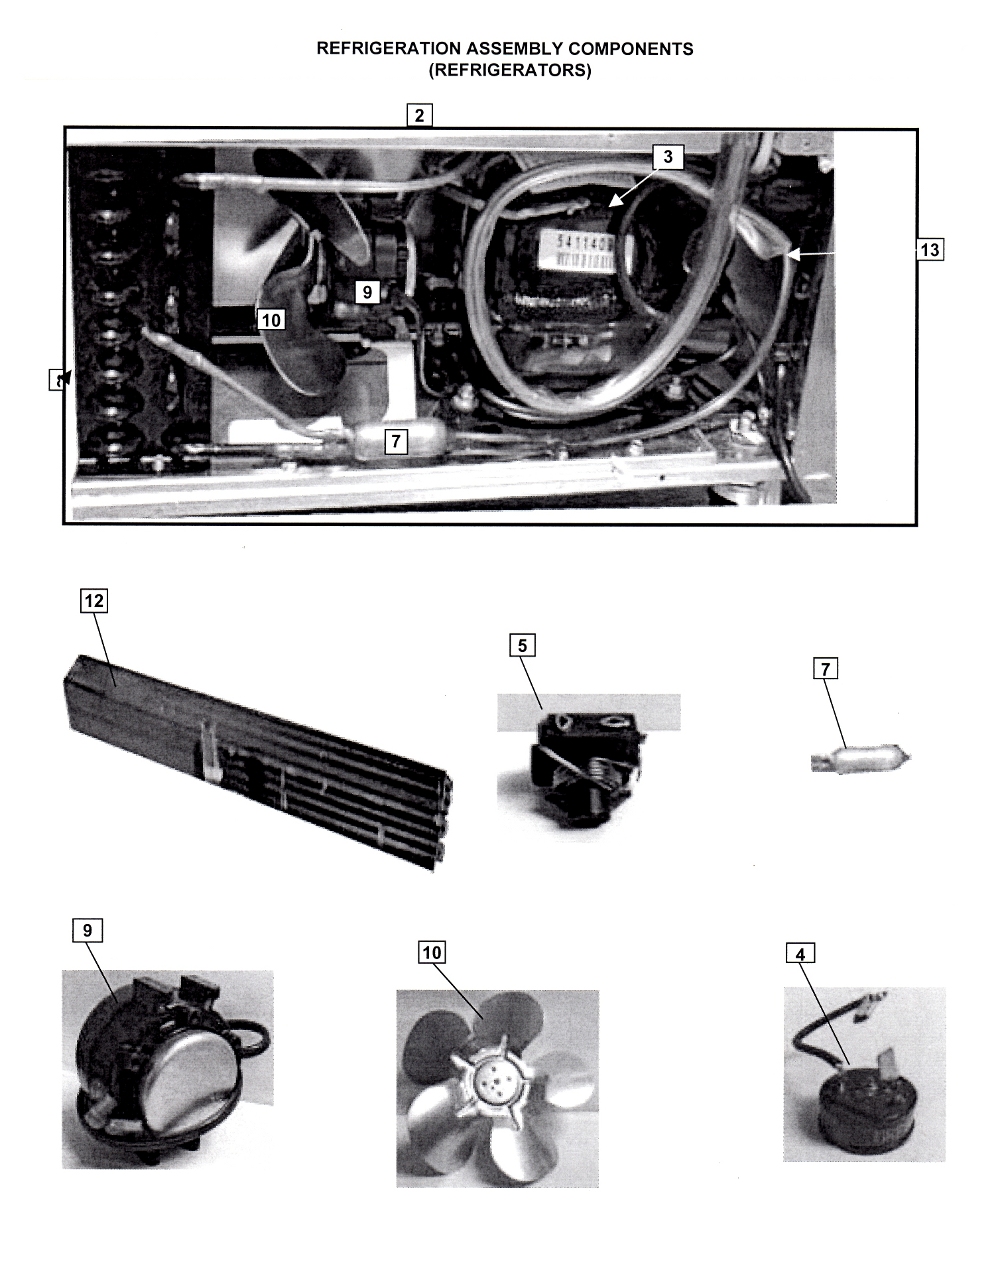 Refrigeration Assembly Components